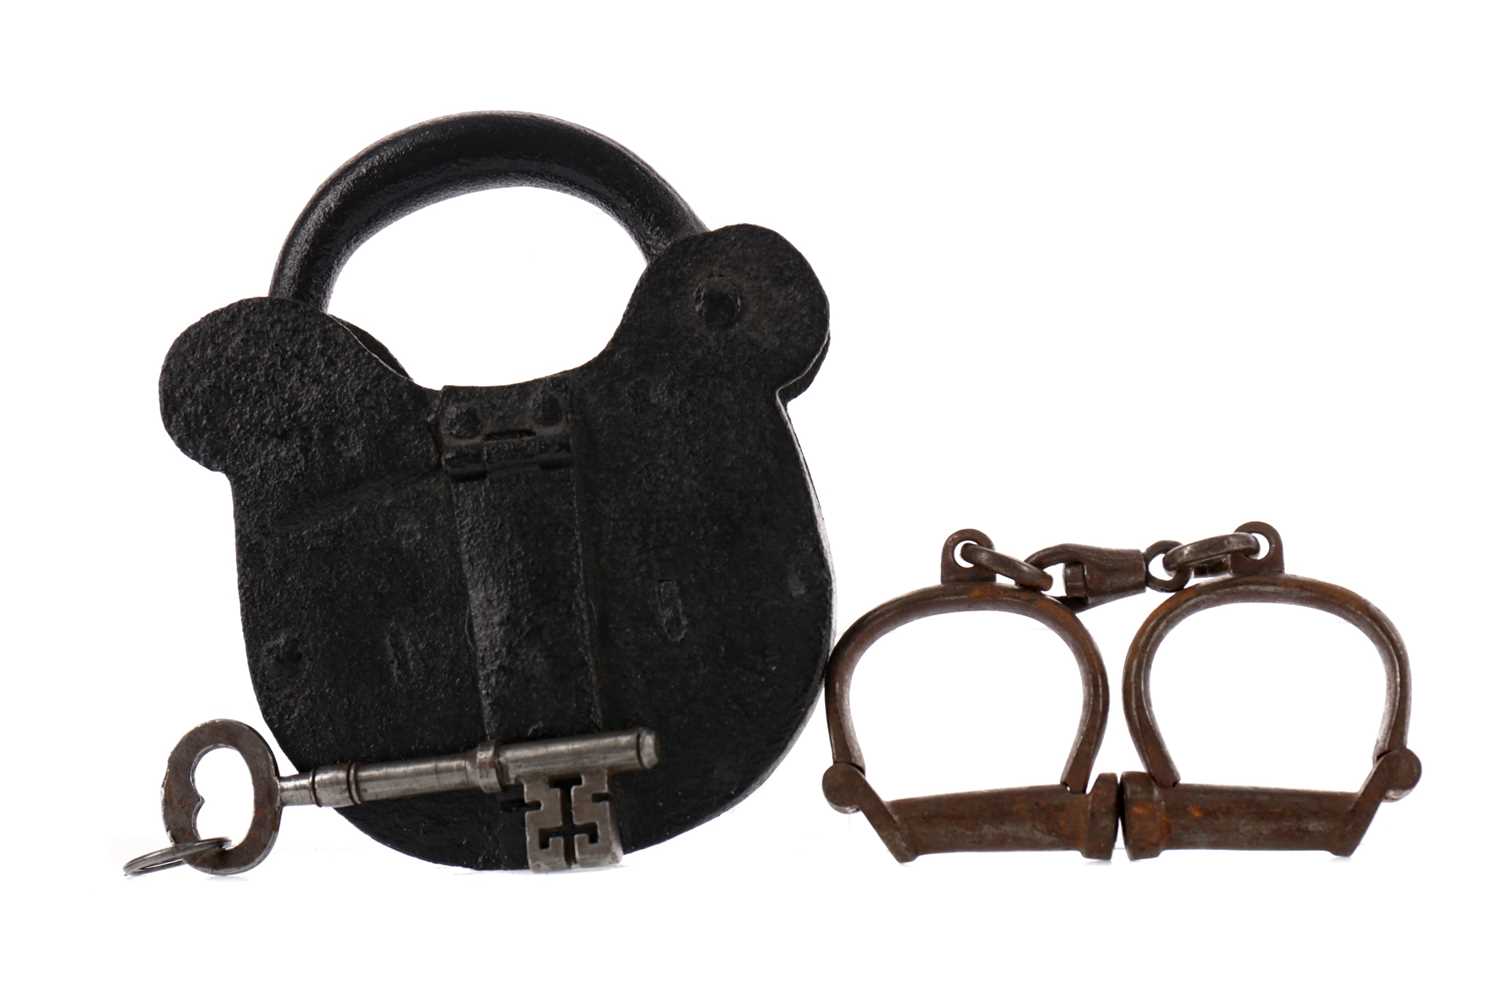 Lot 1686 - A PAIR OF EARLY 20TH CENTURY HIATT CAST METAL HANDCUFFS, ALONG WITH A LOCK, AND A KEY